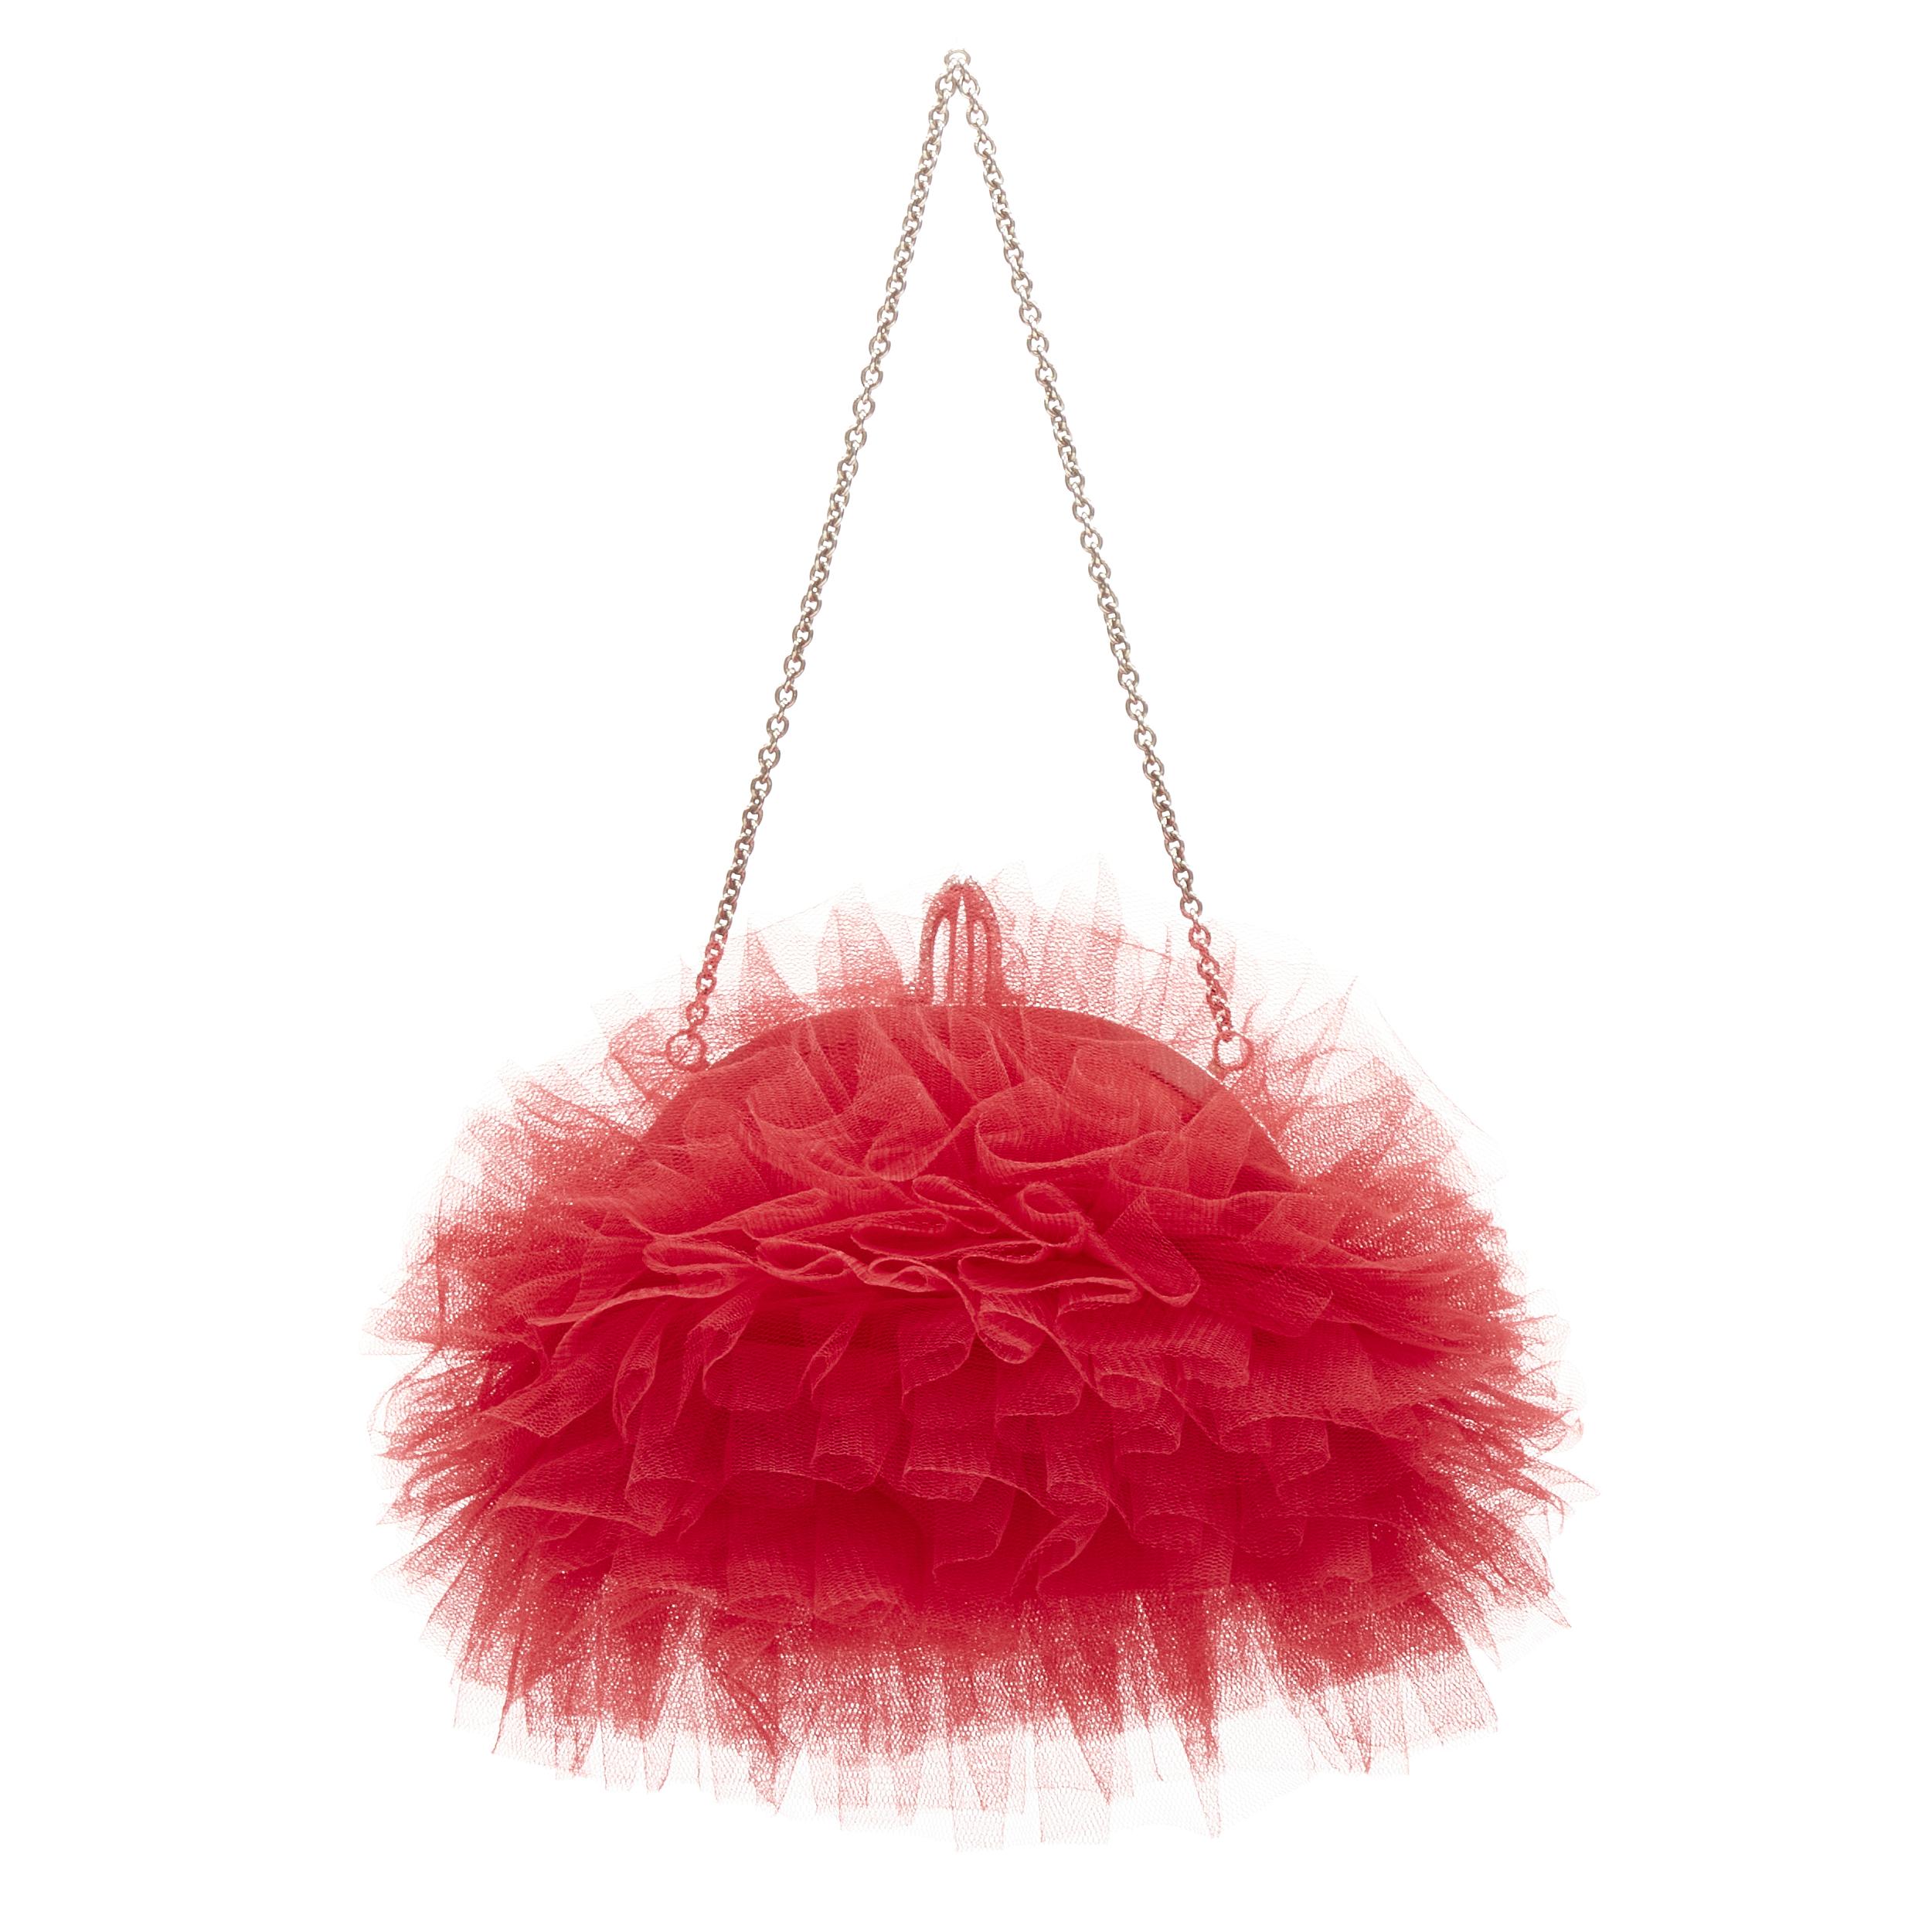 CHRISTIAN LOUBOUTIN Tutulle red tulle strass crystal heel clasp clutch bag For Sale 1